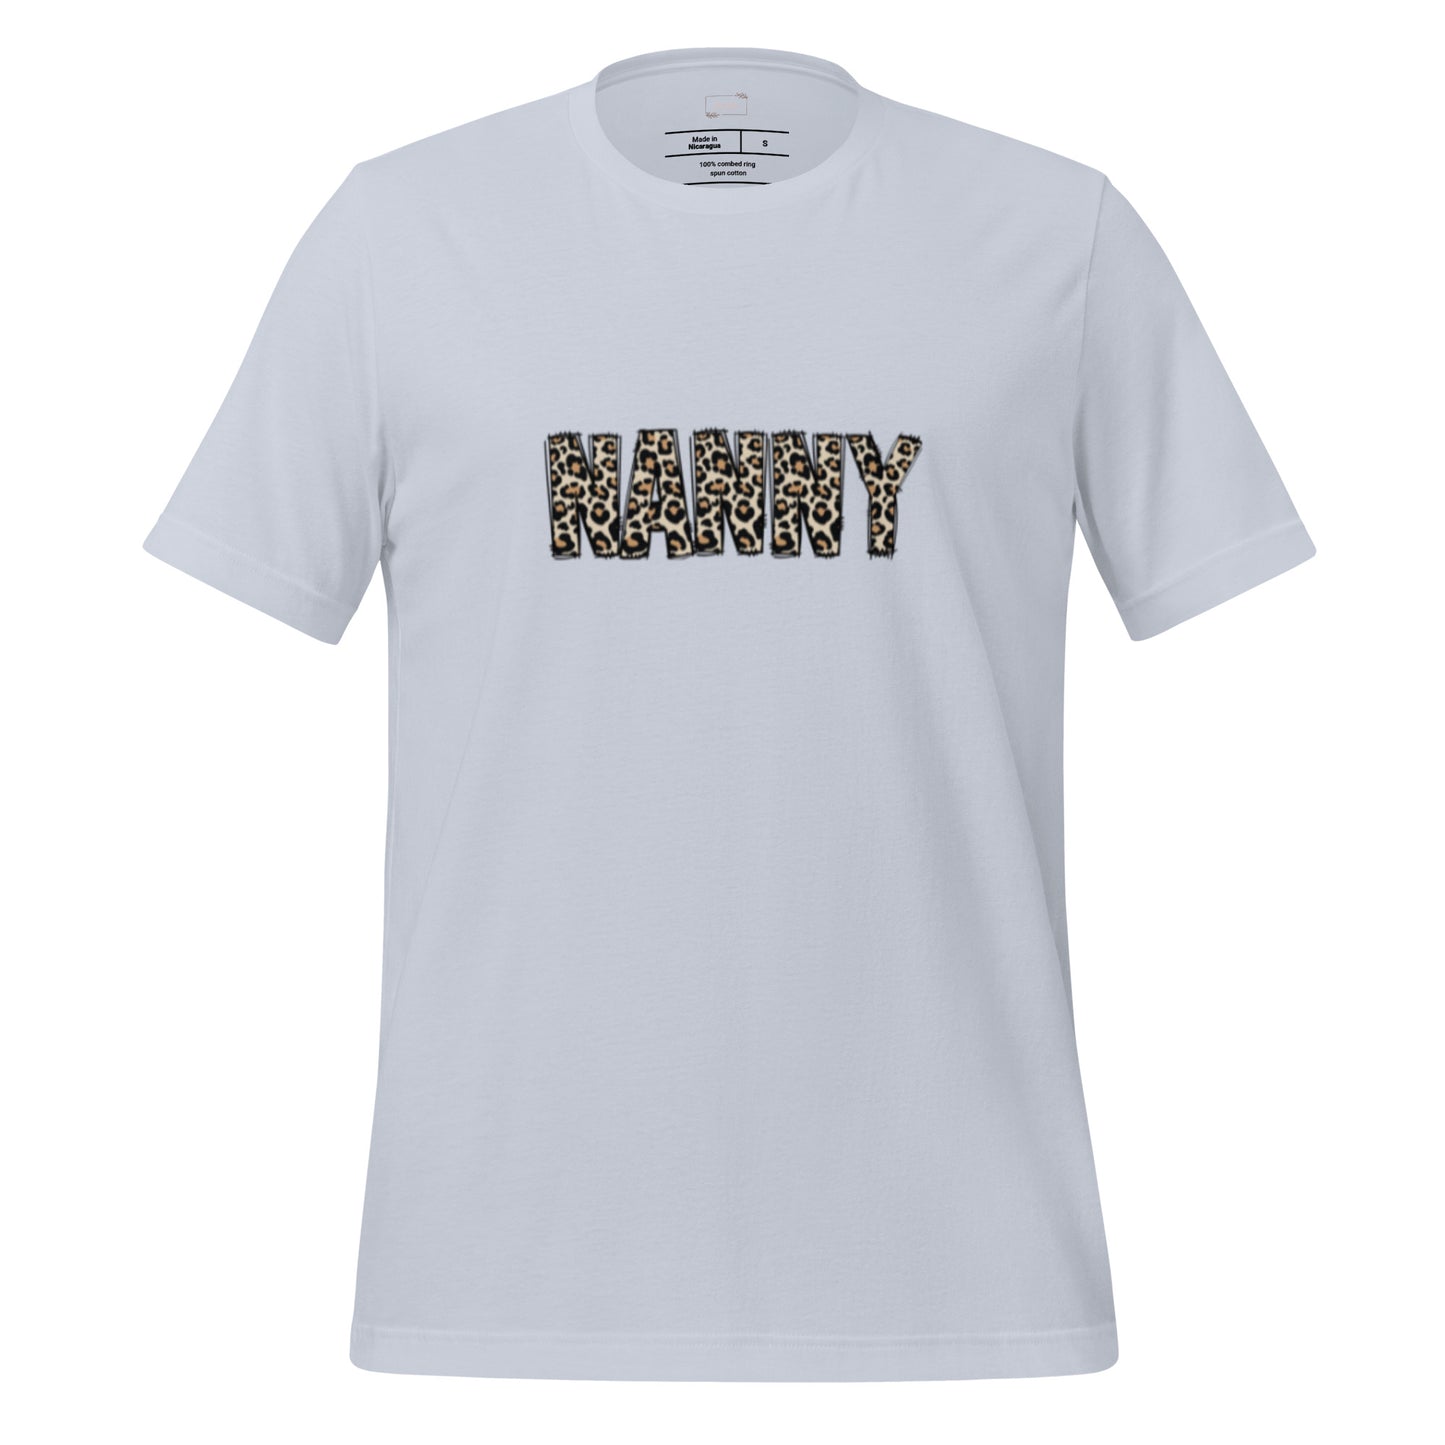 Nanny, Can Be Customized, Unisex t-shirt